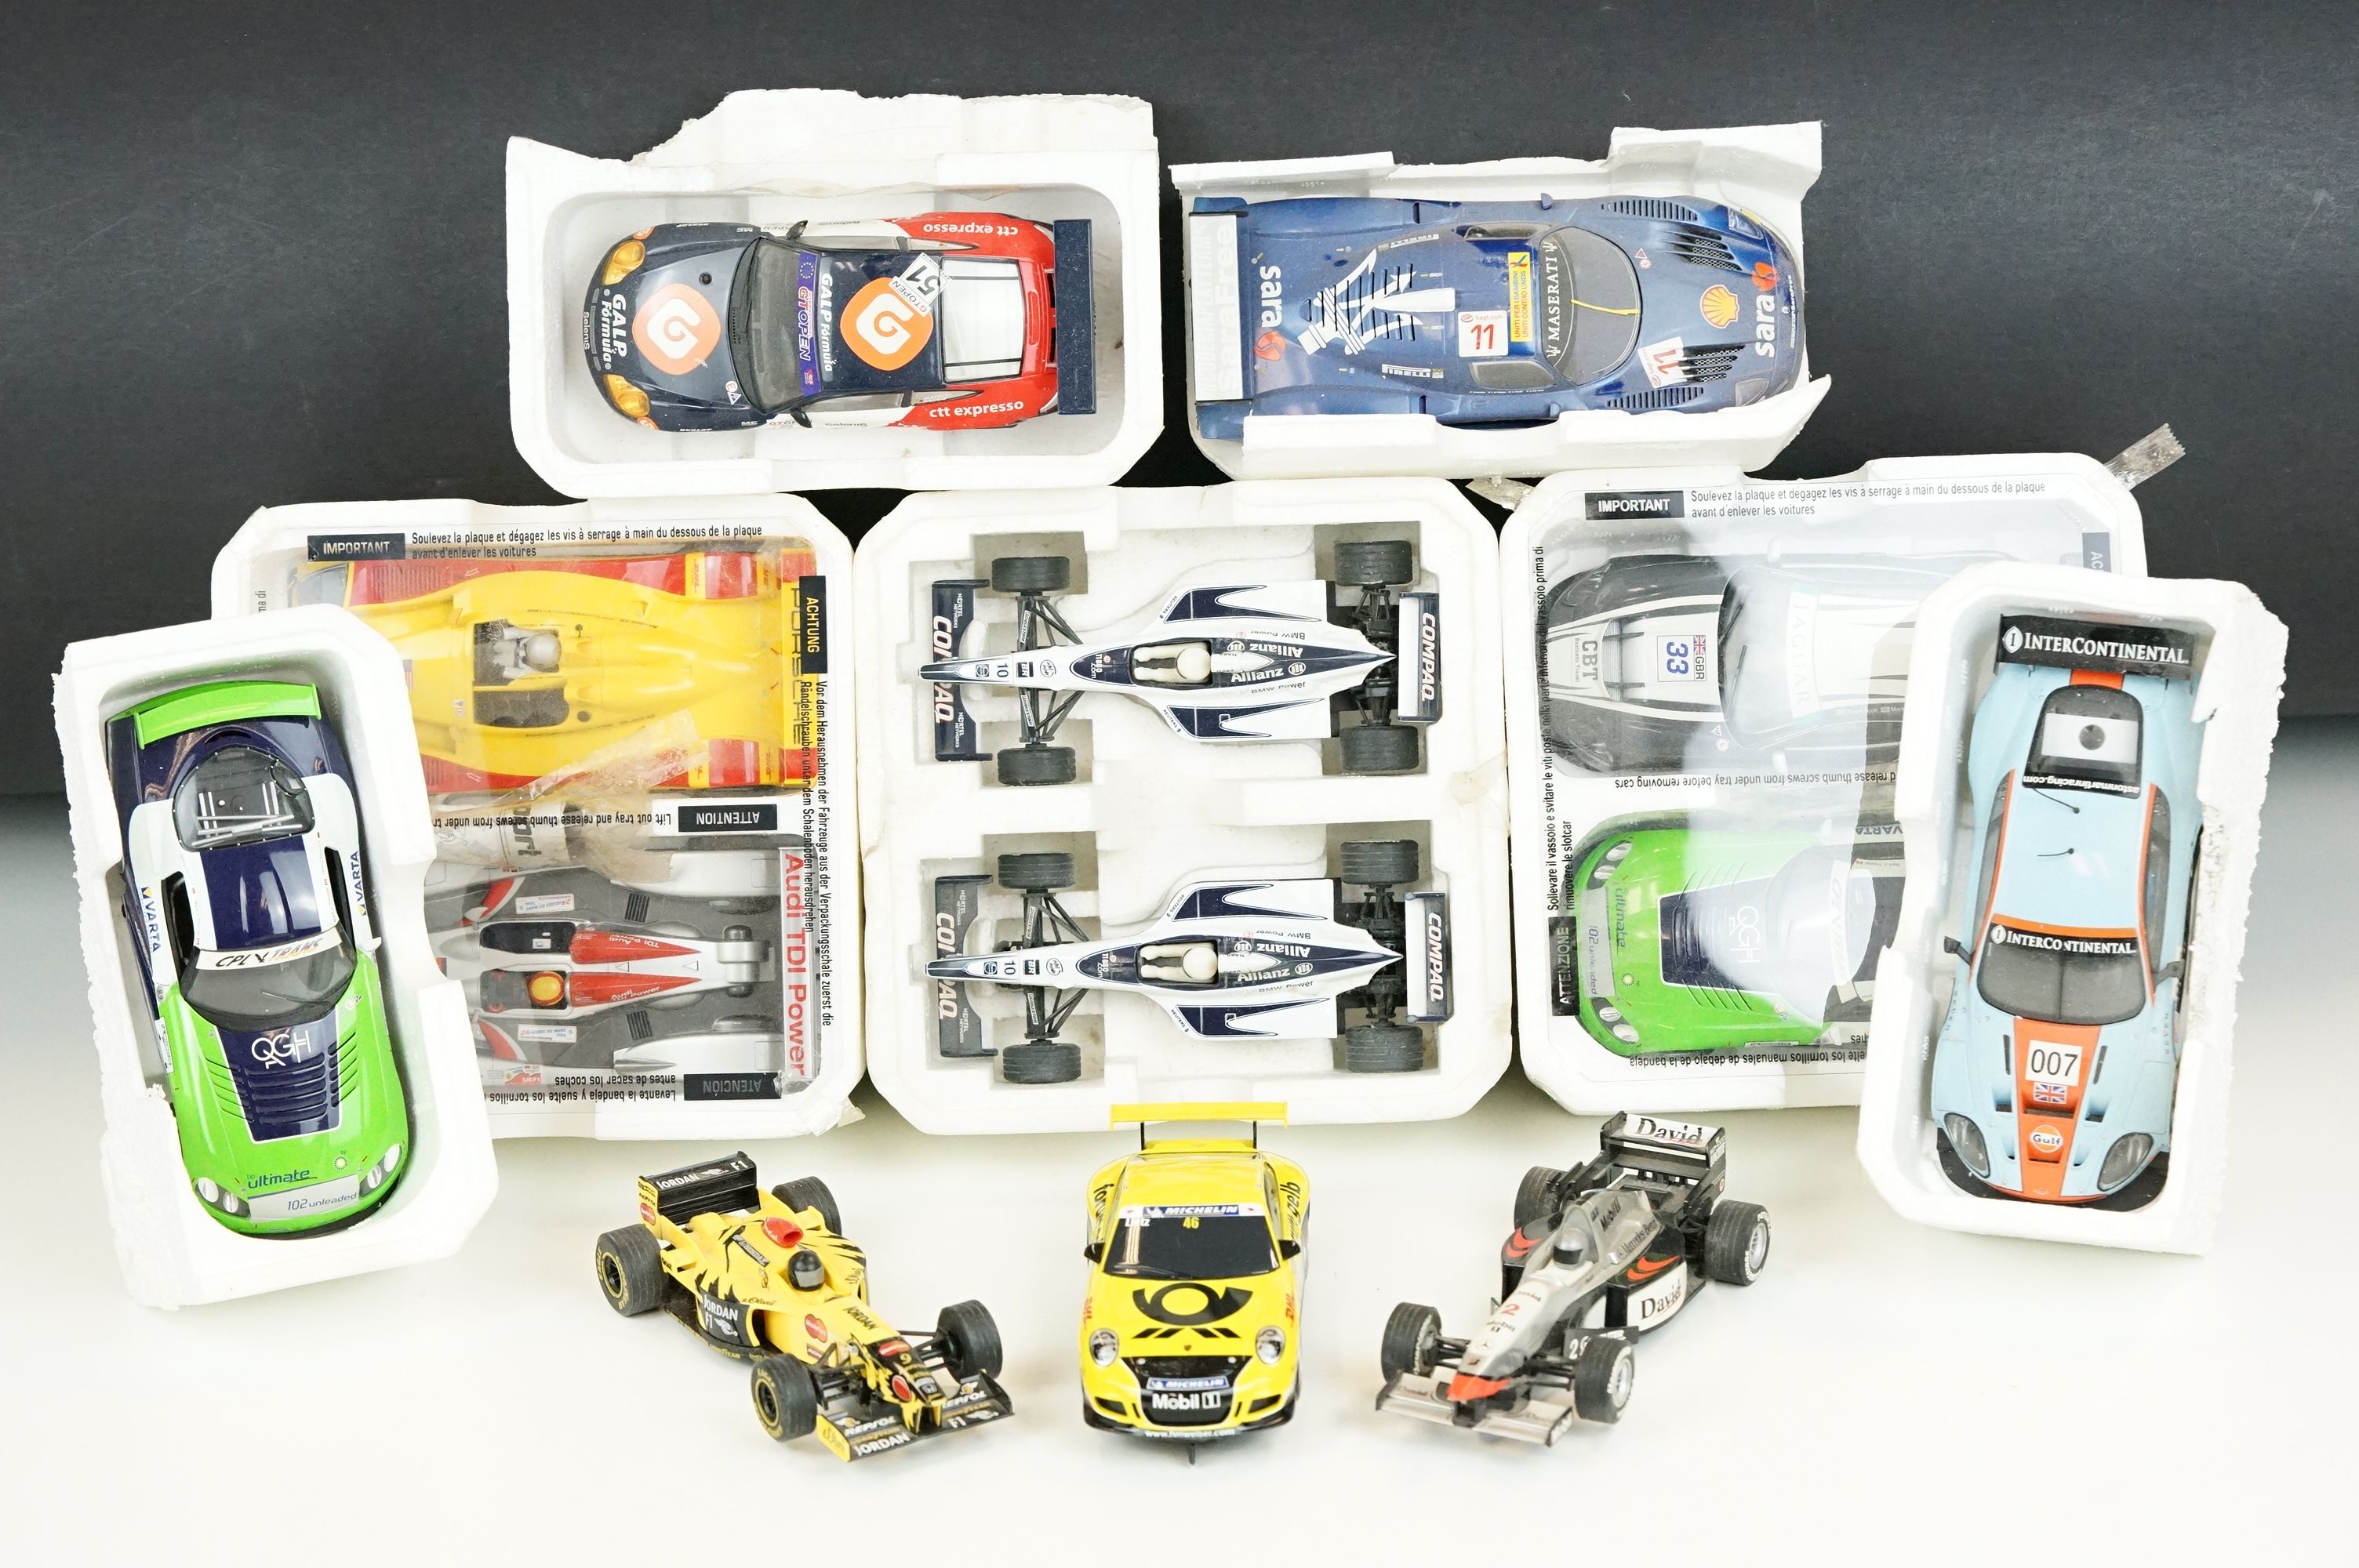 13 Scalextric slot cars to include Williams FW 20 Twin Pack etc, 10 slot cars in original